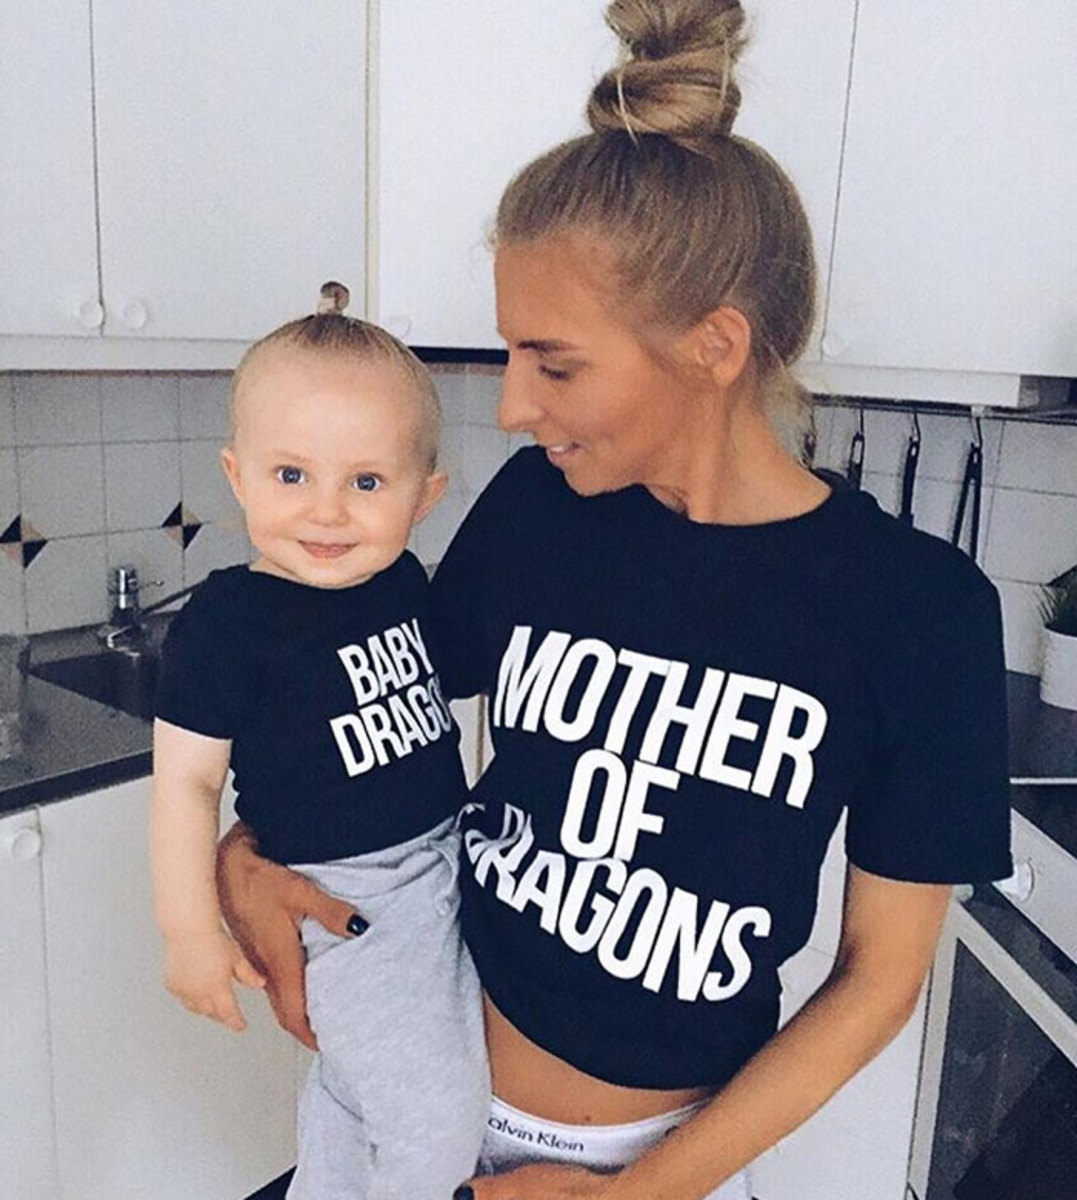 funny matching t shirts 11 - 15 Of The Best Matching T-Shirt Ideas Ever